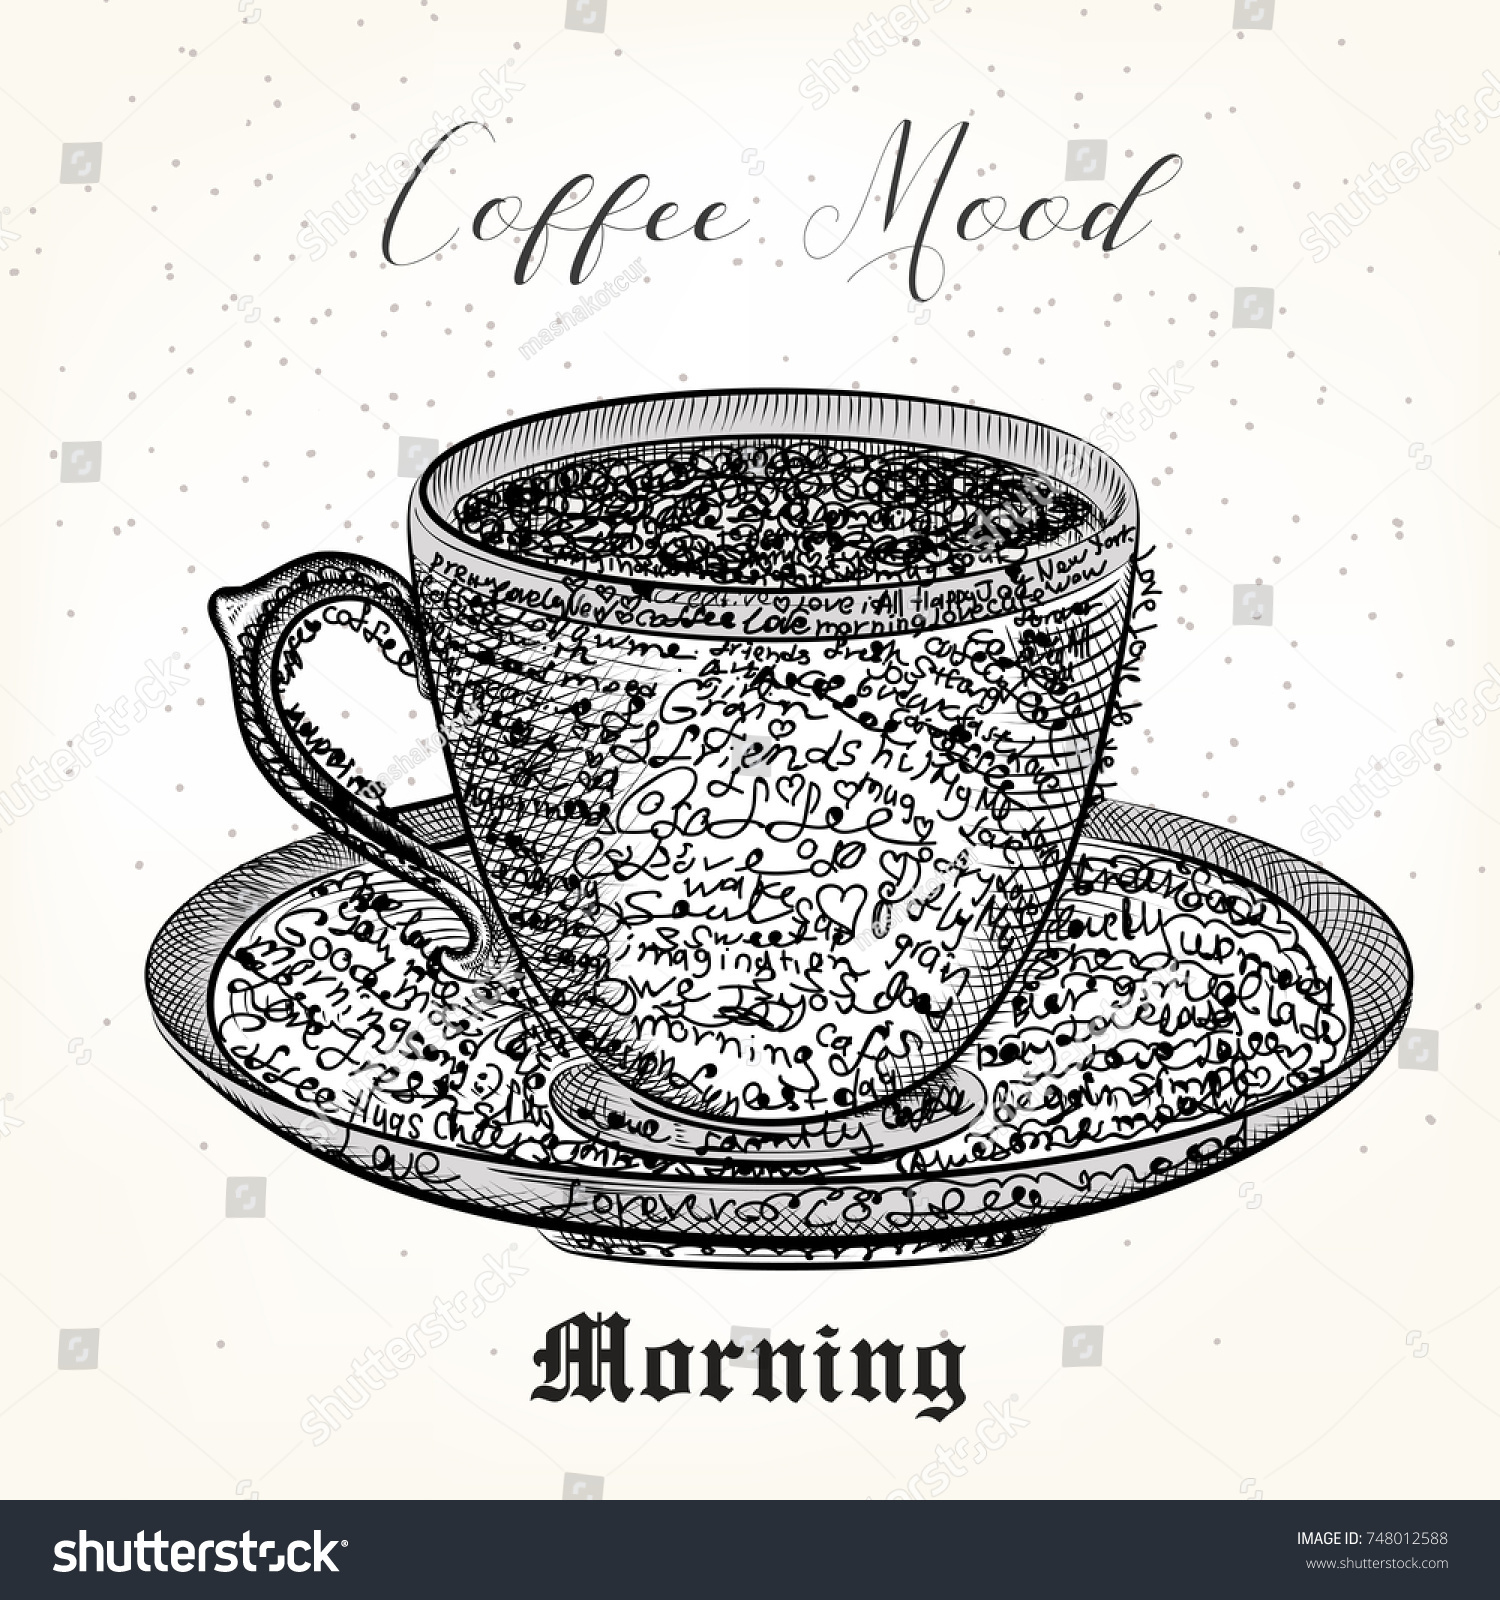 Coffee Illustration Cup Nice Positive Words Stock Vector Royalty Free